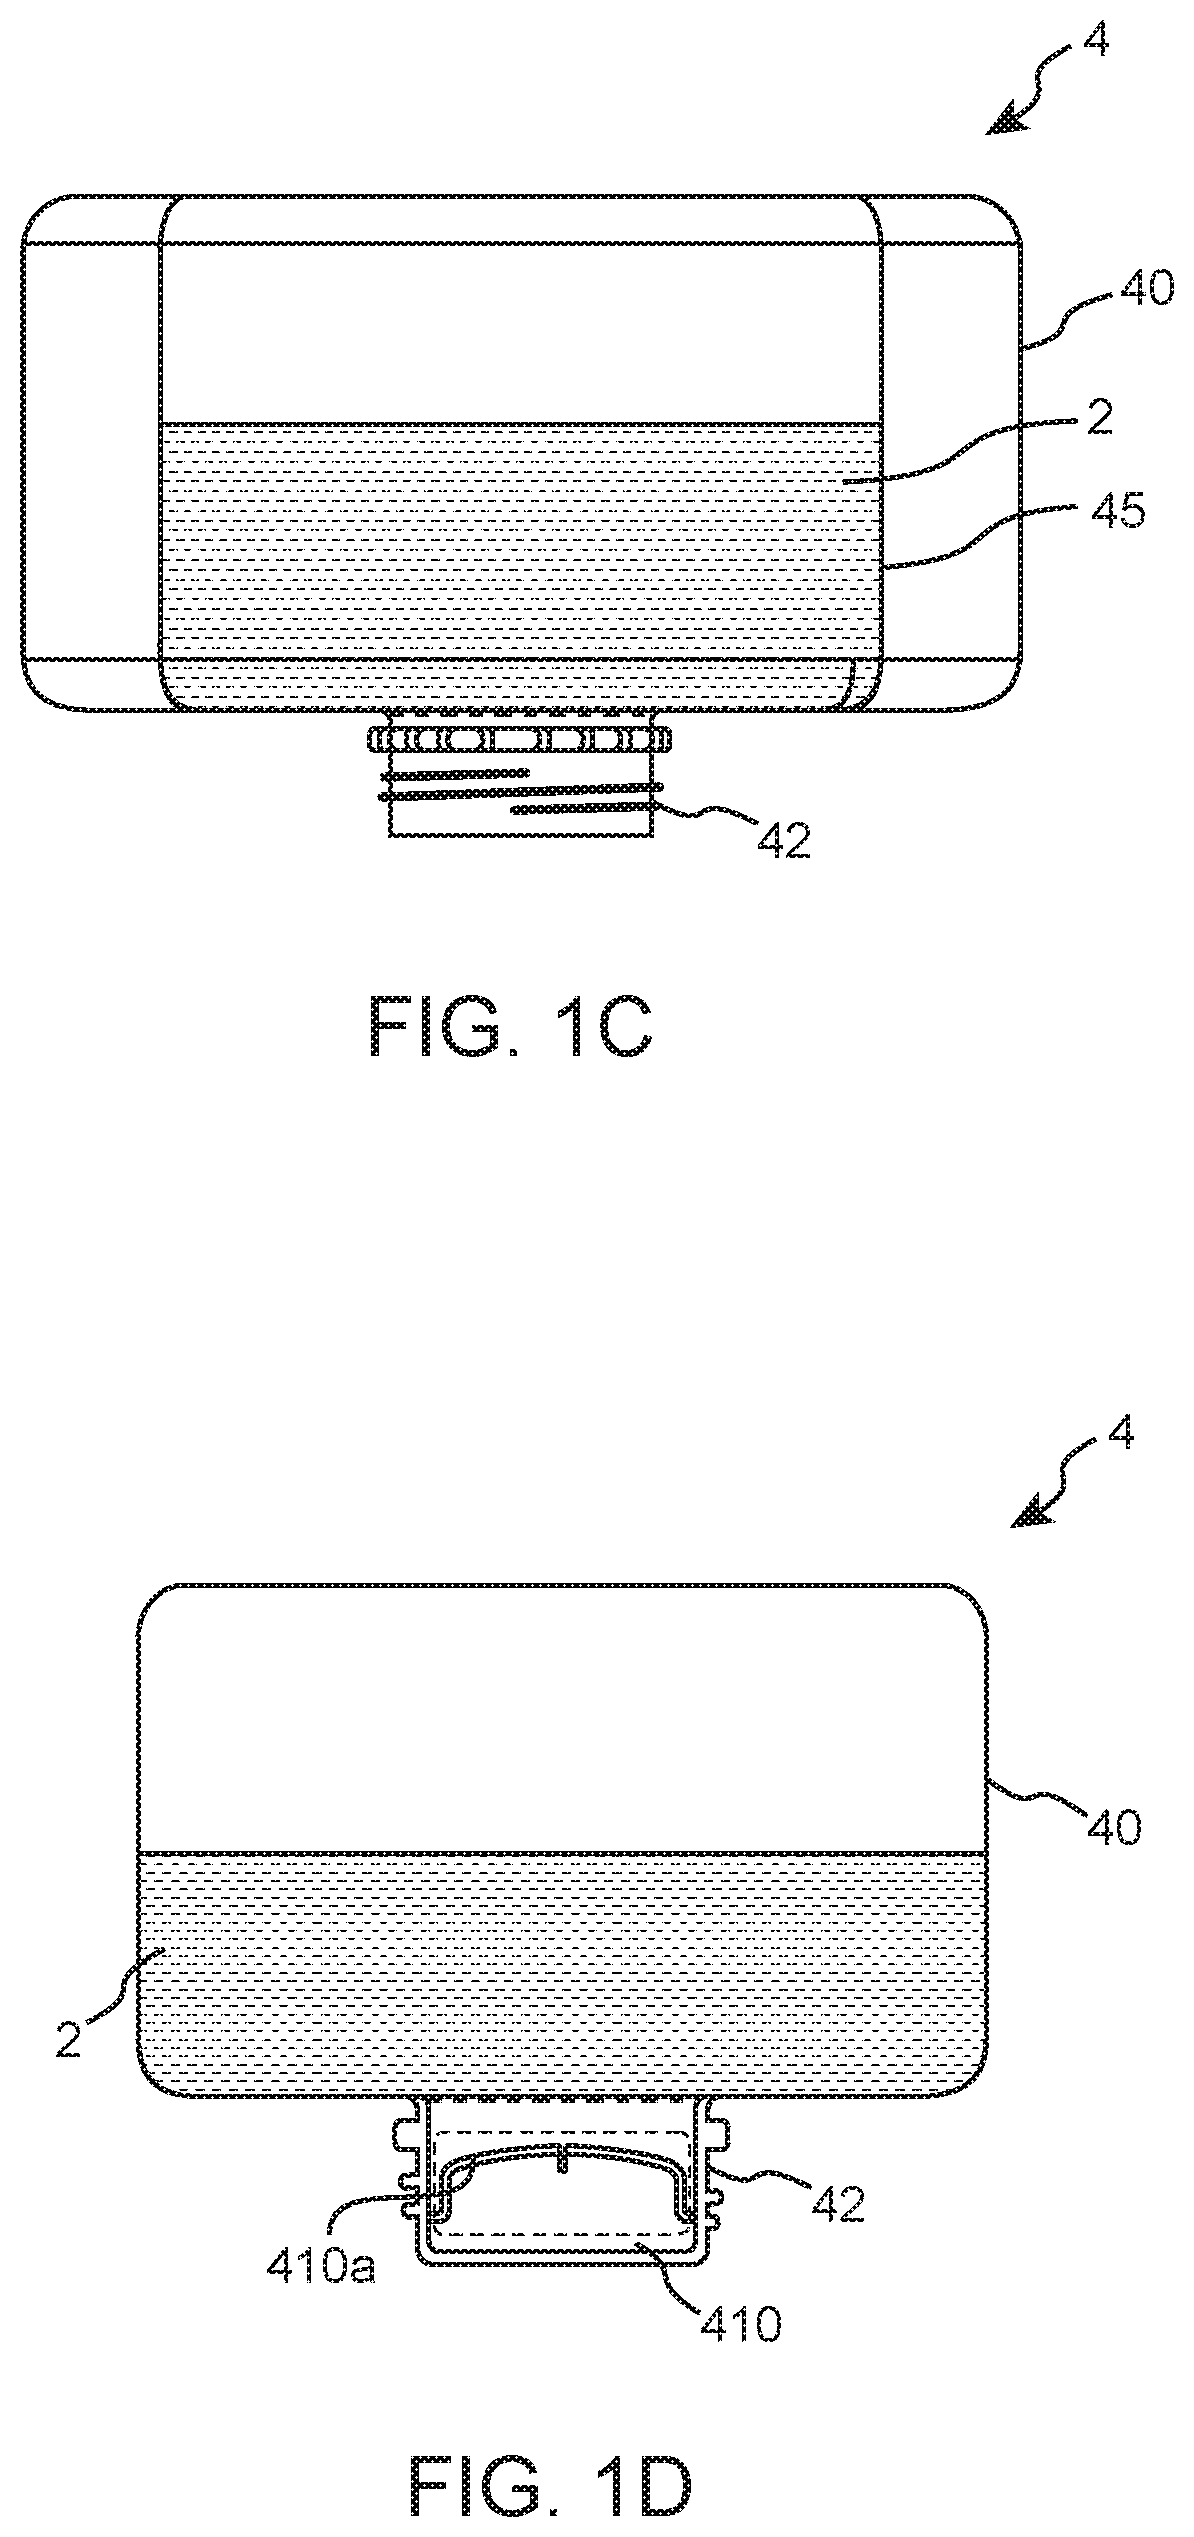 Cartridge and a base unit for use in an oral care appliance